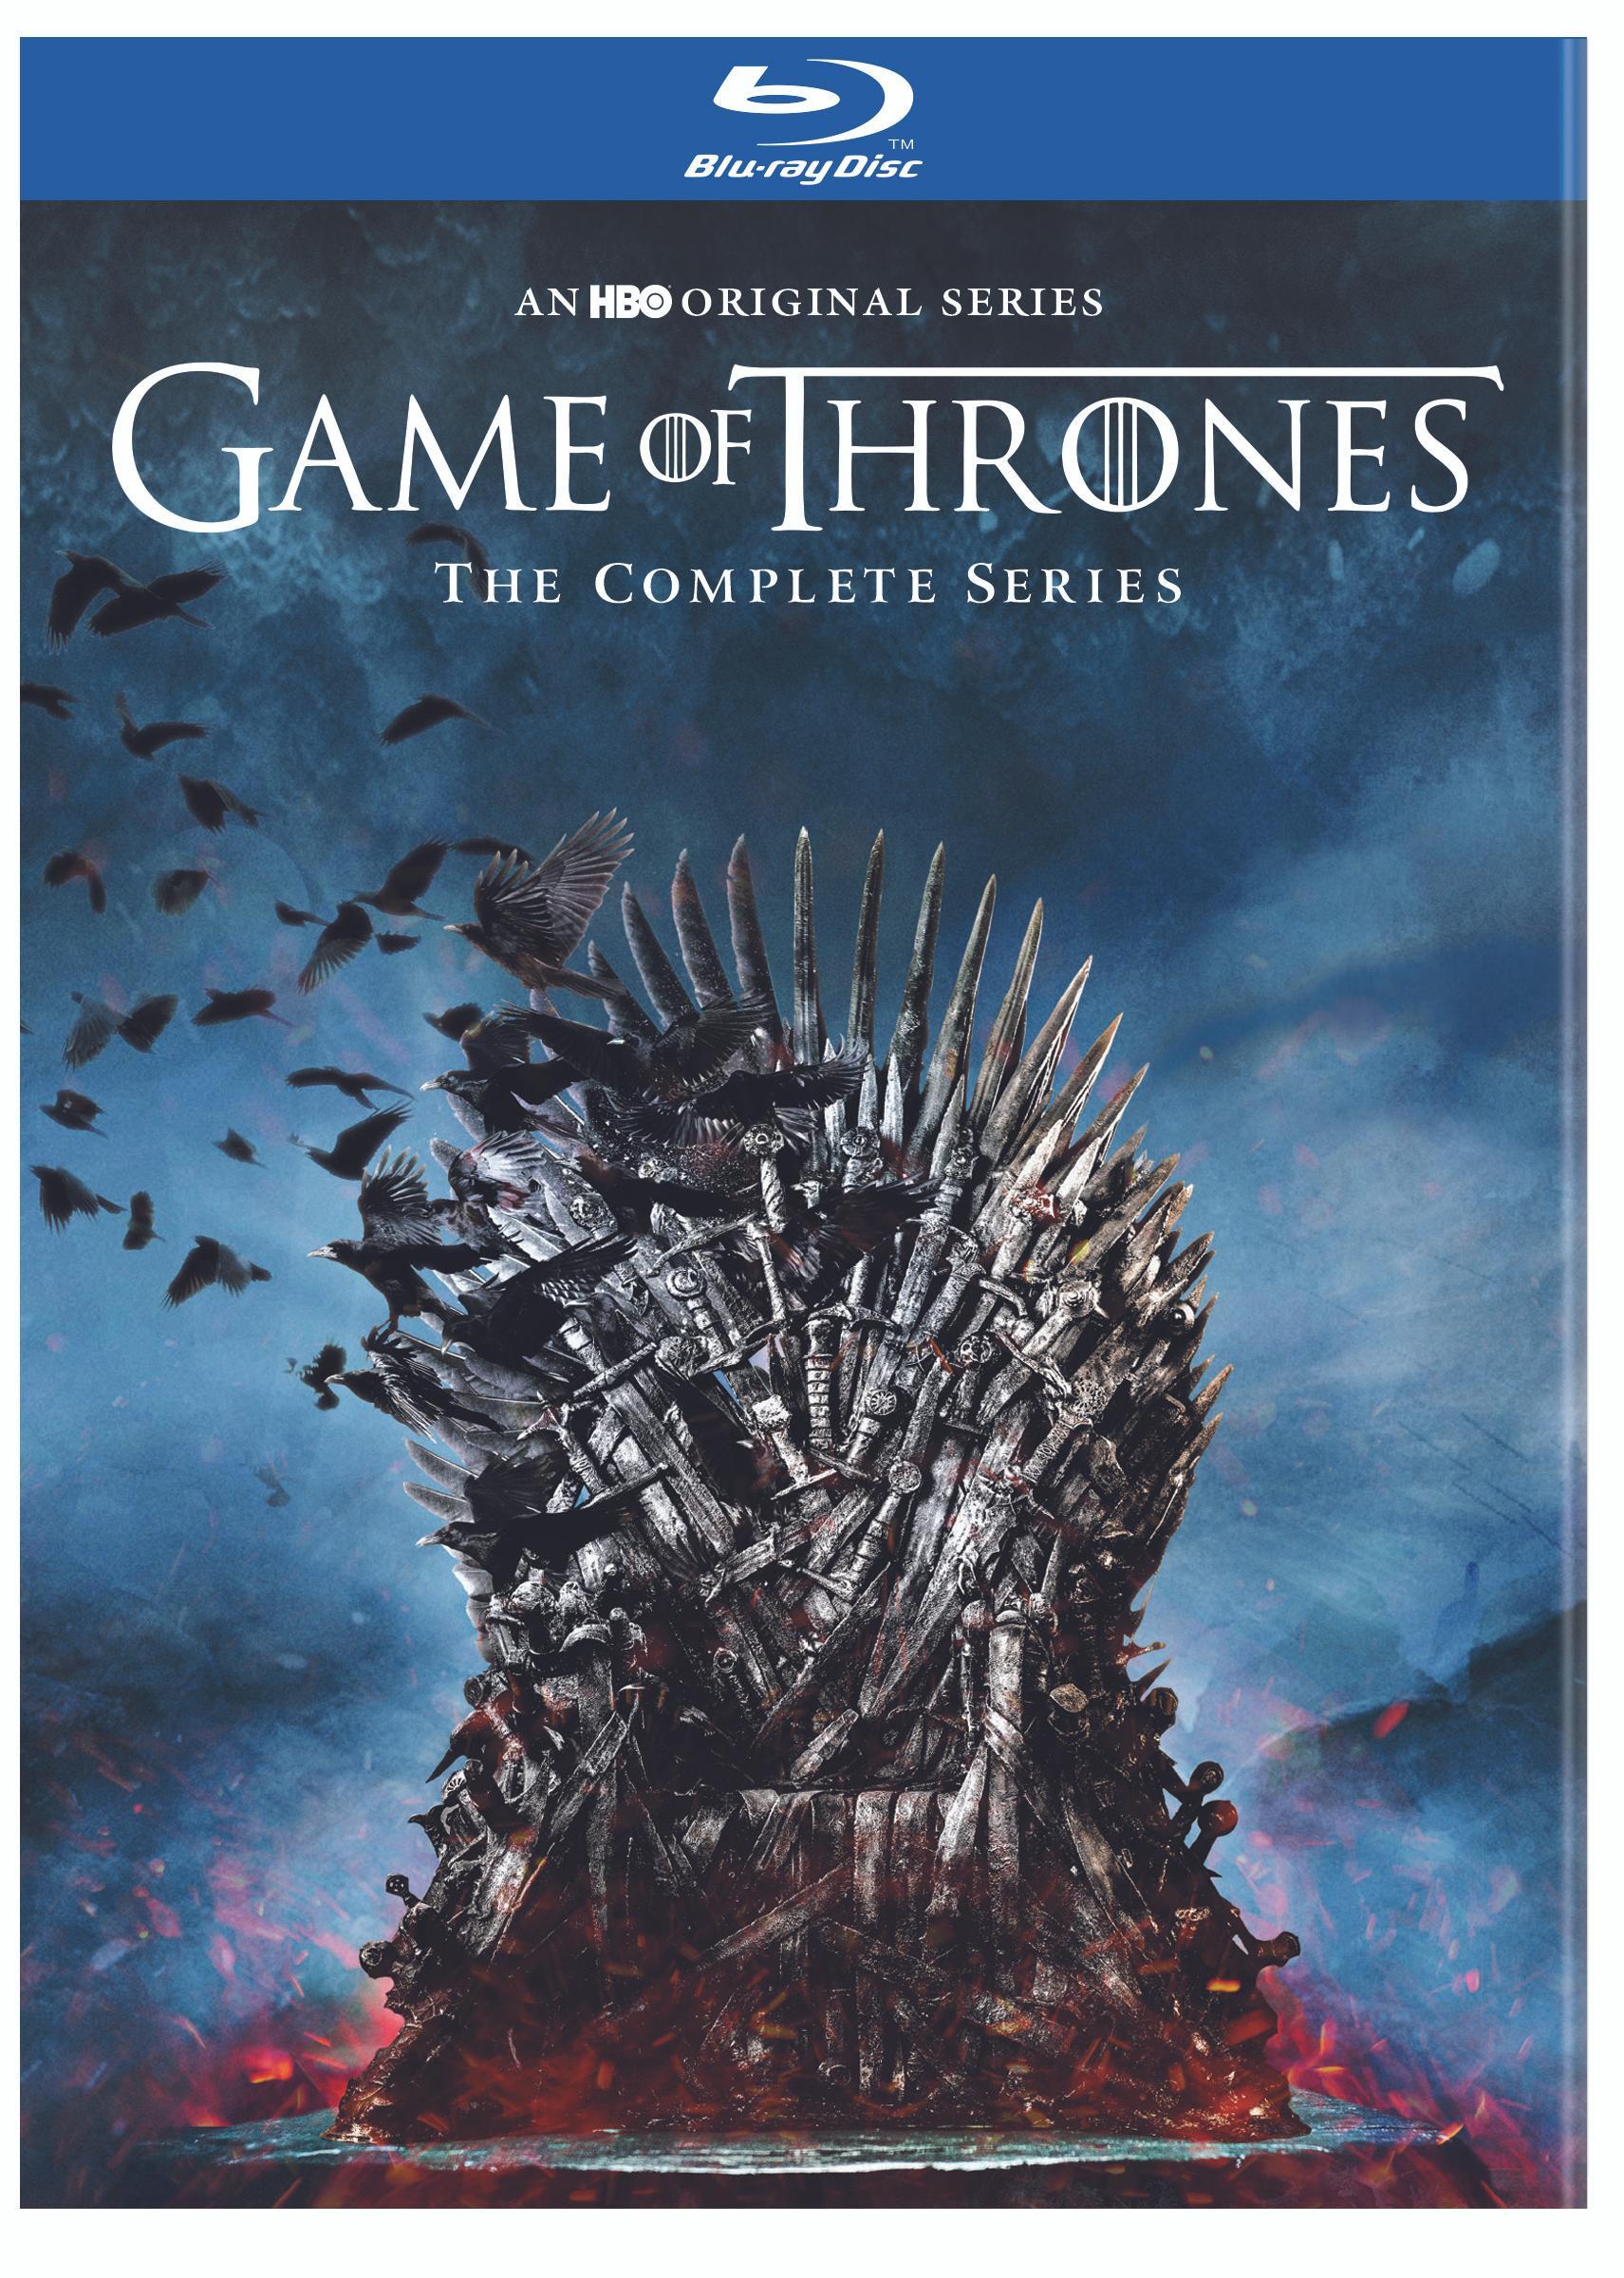 Game Of Thrones: The Complete Series (Box Set) - Blu-ray [ 2019 ]  - Sci Fi Television On Blu-ray - TV Shows On GRUV